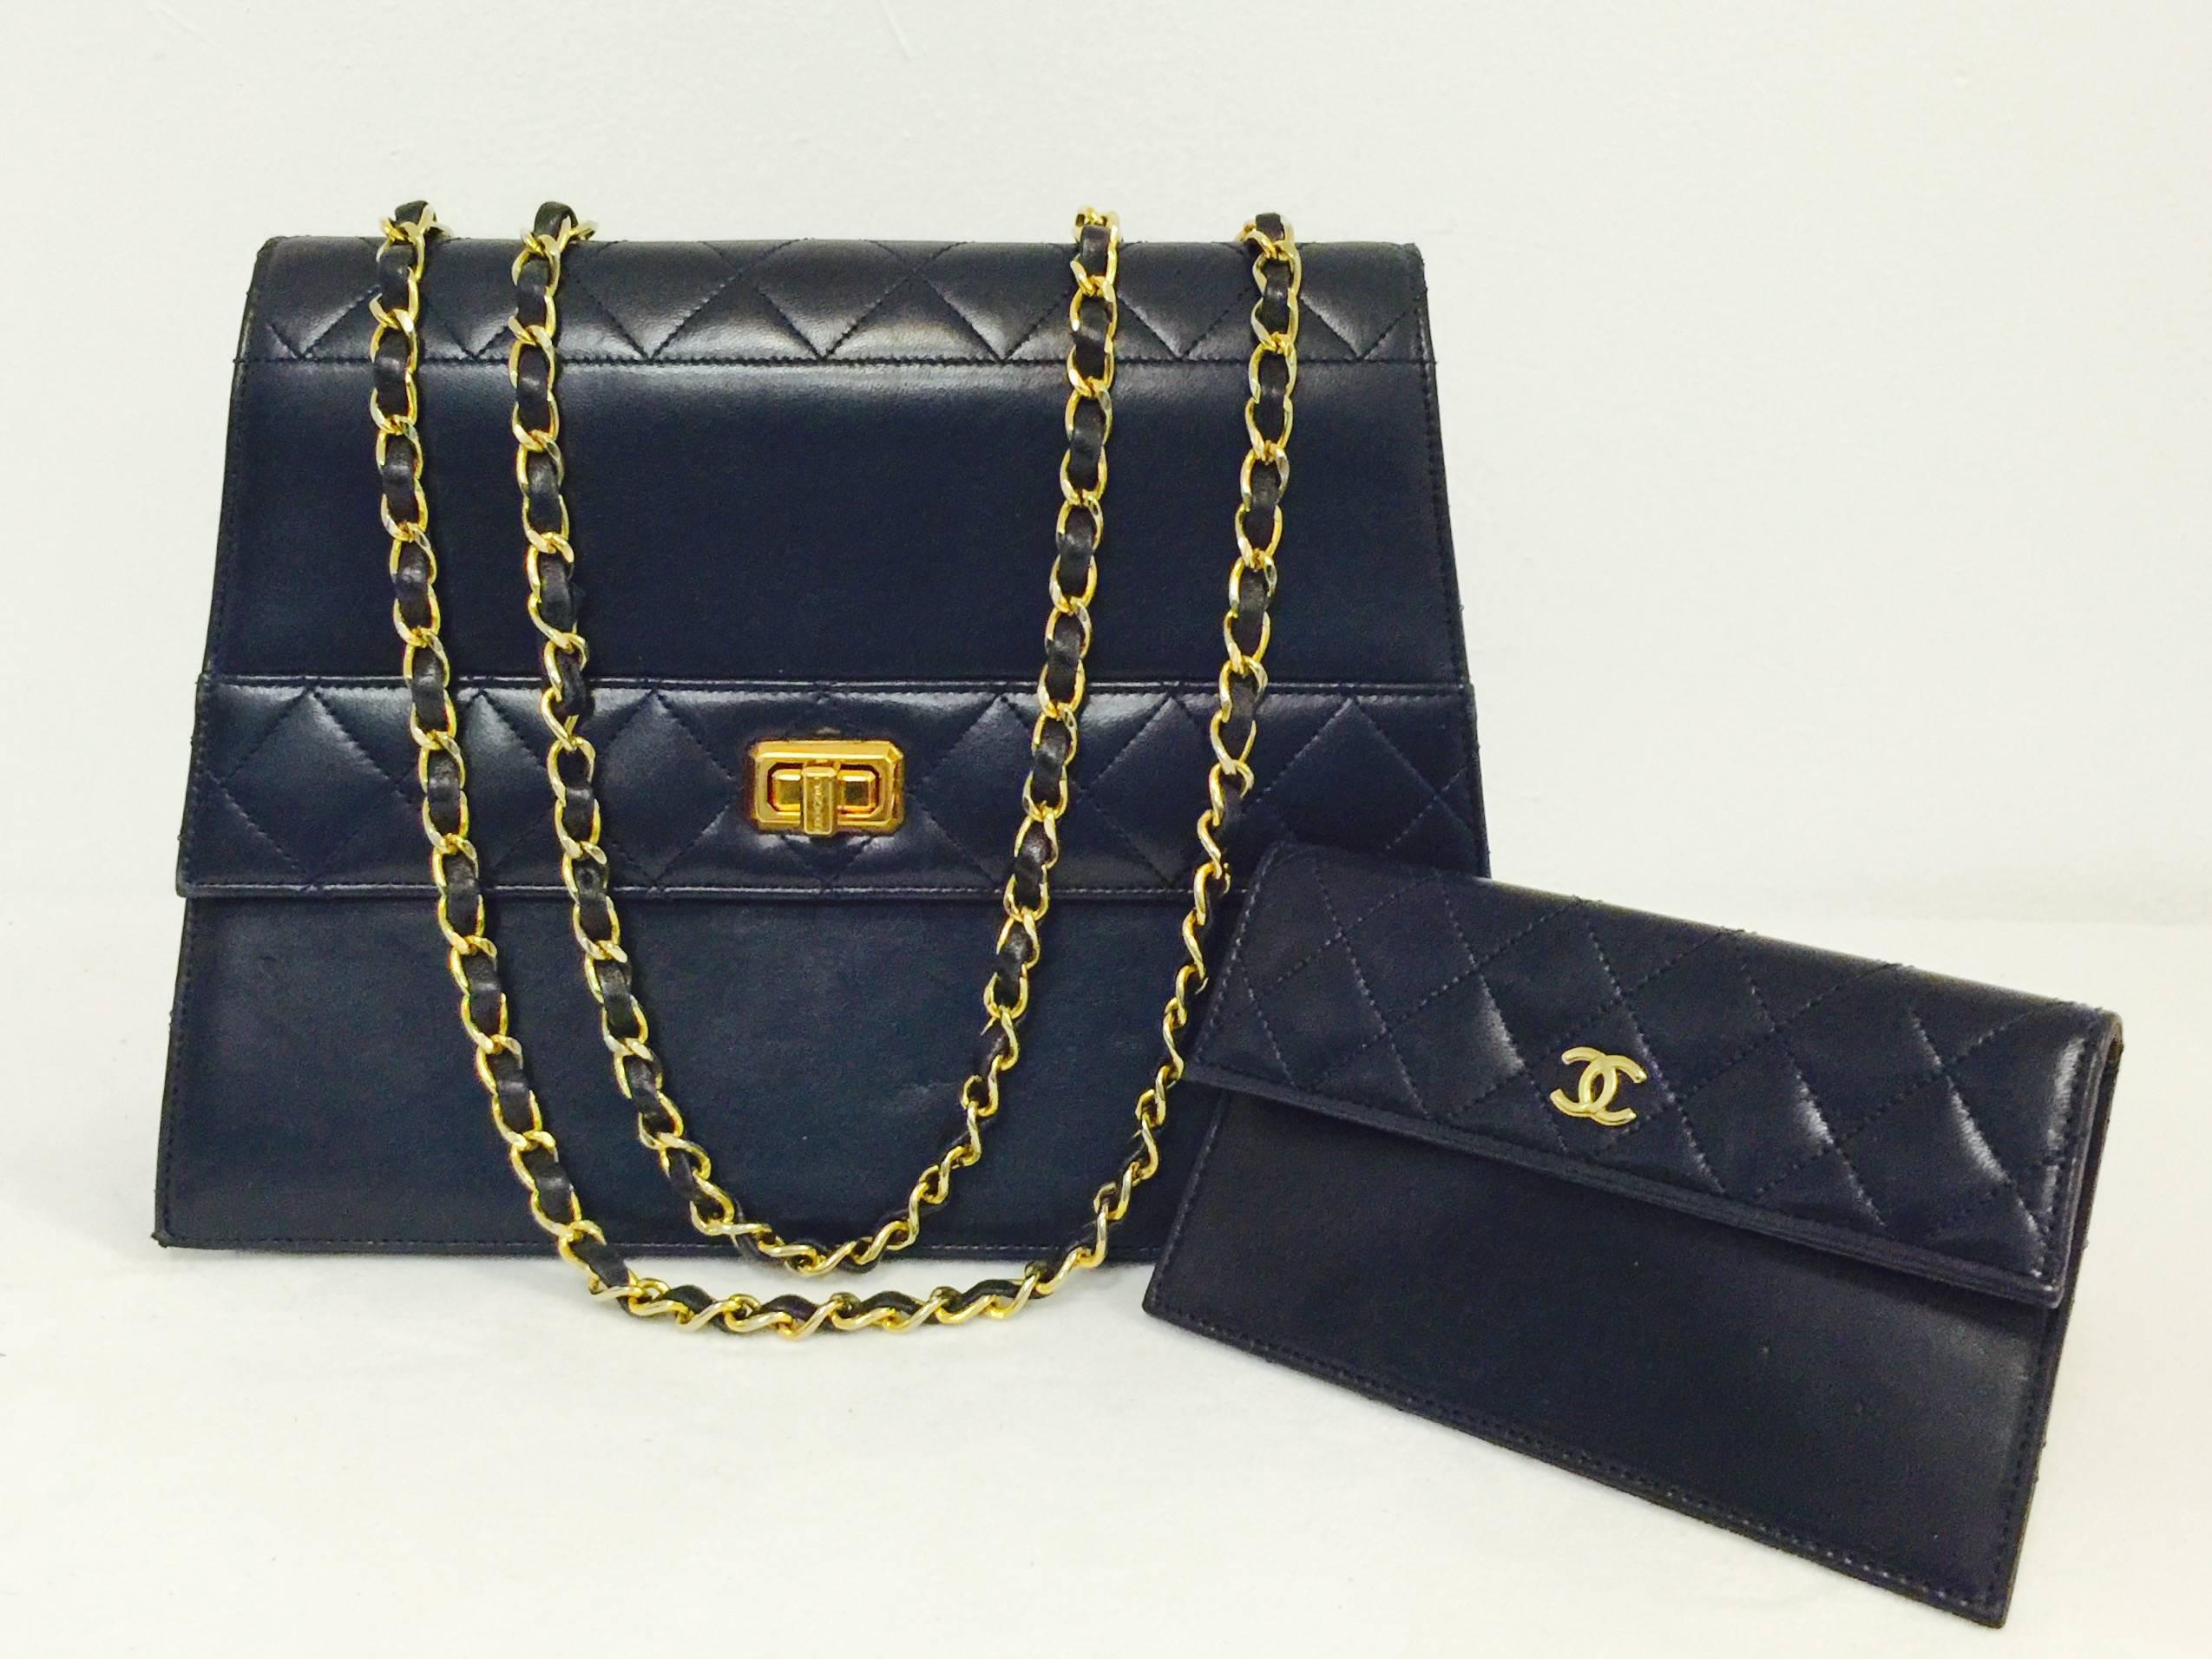 1980s Chanel Navy Handbag With Matching Wallet is in unbelievable, vintage condition!  Featuring supple lambskin and gold tone hardware. bag has dual leather woven, chain straps, structured, trapezoidal shape and quilted detail on sides and front